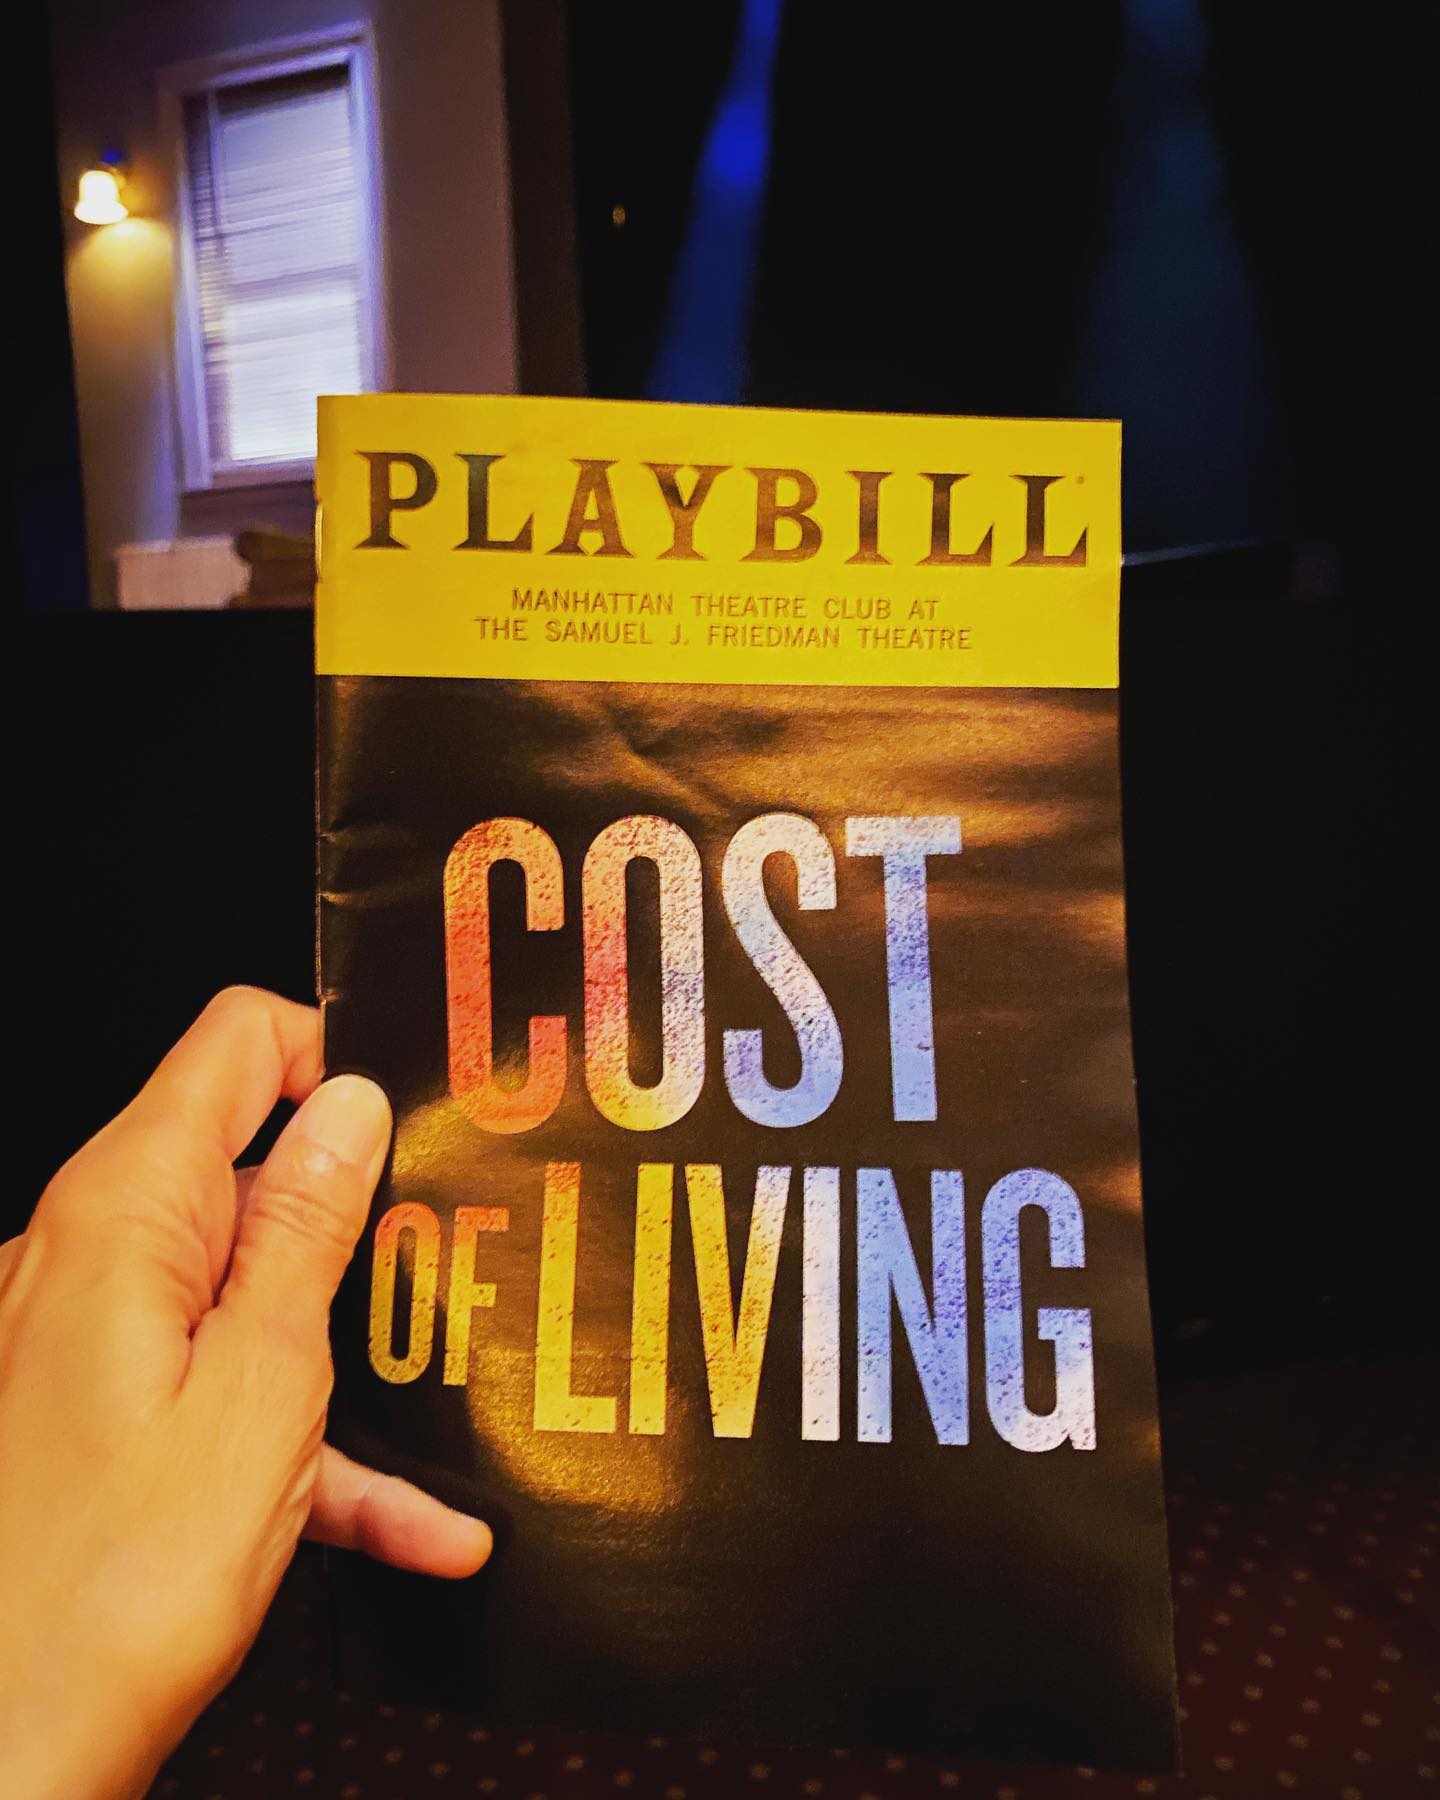 Cost of Living @mtc_nyc is about “the complexity of caring, and being cared for,” as aptly described on the MTC website. I also found it to be a deep inquiry into privilege and vulnerability in a way that was raw and grounded. Hard, random, inequitable, exquisite humanity, right there on the stage. Rush tickets landed me in the front row. I don’t always love that but oh, to watch these actor’s work close-up proved to be a gift. This play by @martyna_majok (who also penned Sanctuary City, a standout last season) won the Pulitzer in 2018. #broadwayplay #nyctheatre #iloveplays #theatre #playwrights #theatrelover #artmatters #theatreislife